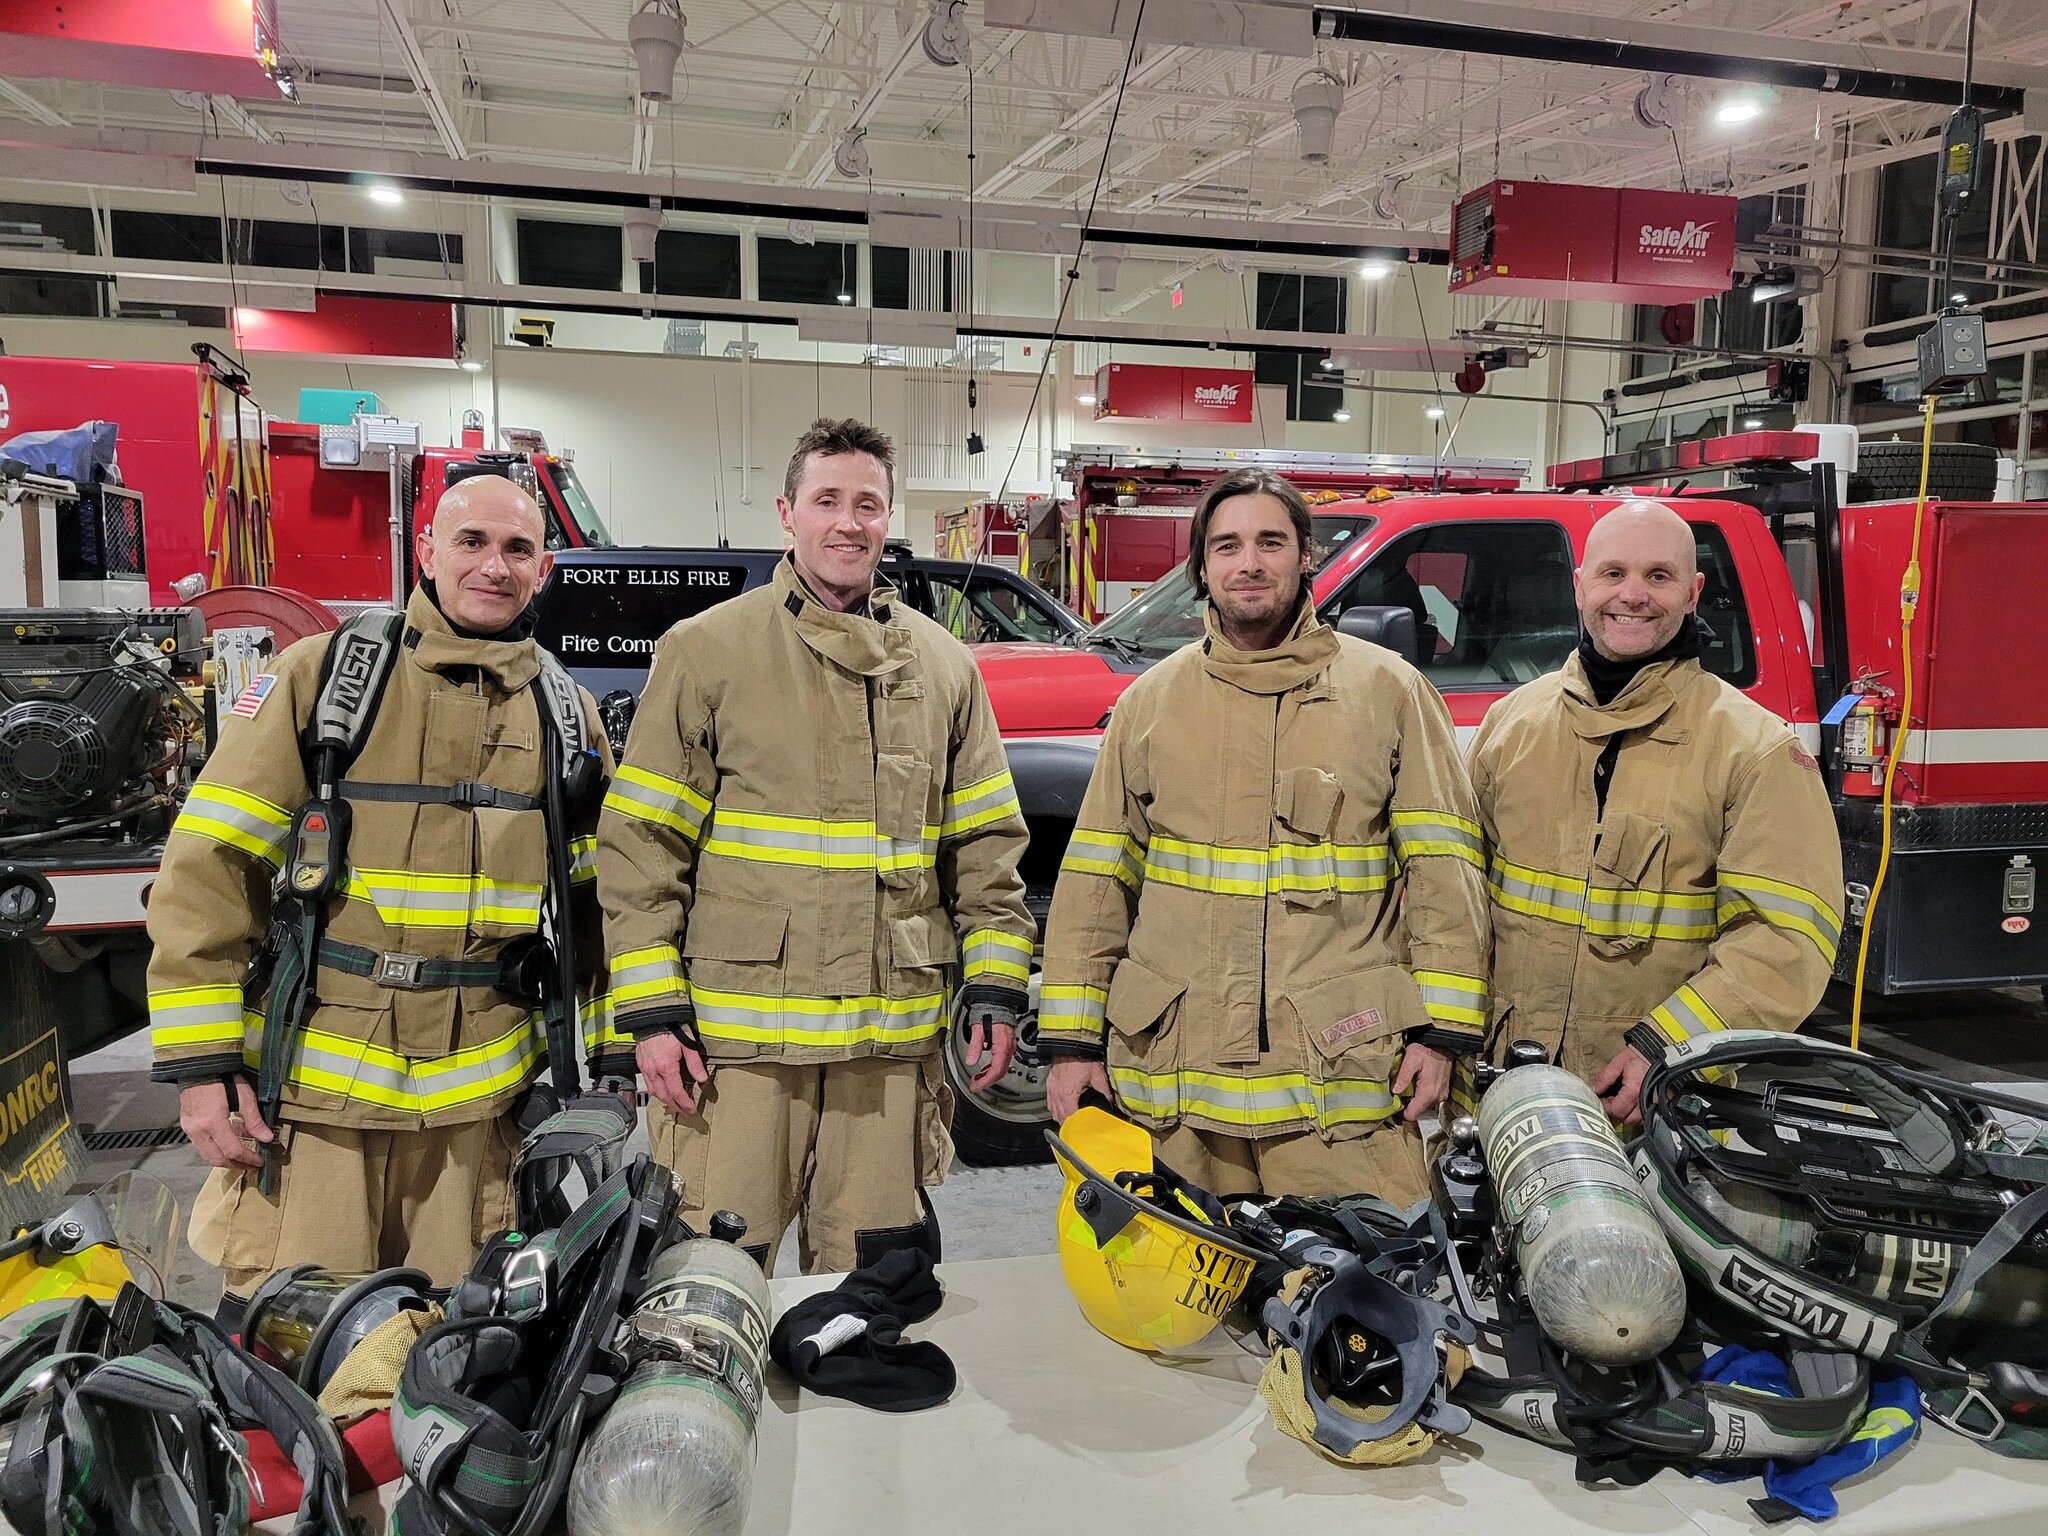 Fort Ellis Fire/Rescue welcomes its 2024 recruit class.  We are pleased that Bijan Fathy, Mark Braatz, Max Folley and John Vonk have joined the department.  They spent Monday night learning the ins and outs of self-contained breathing apparatus (SCBA